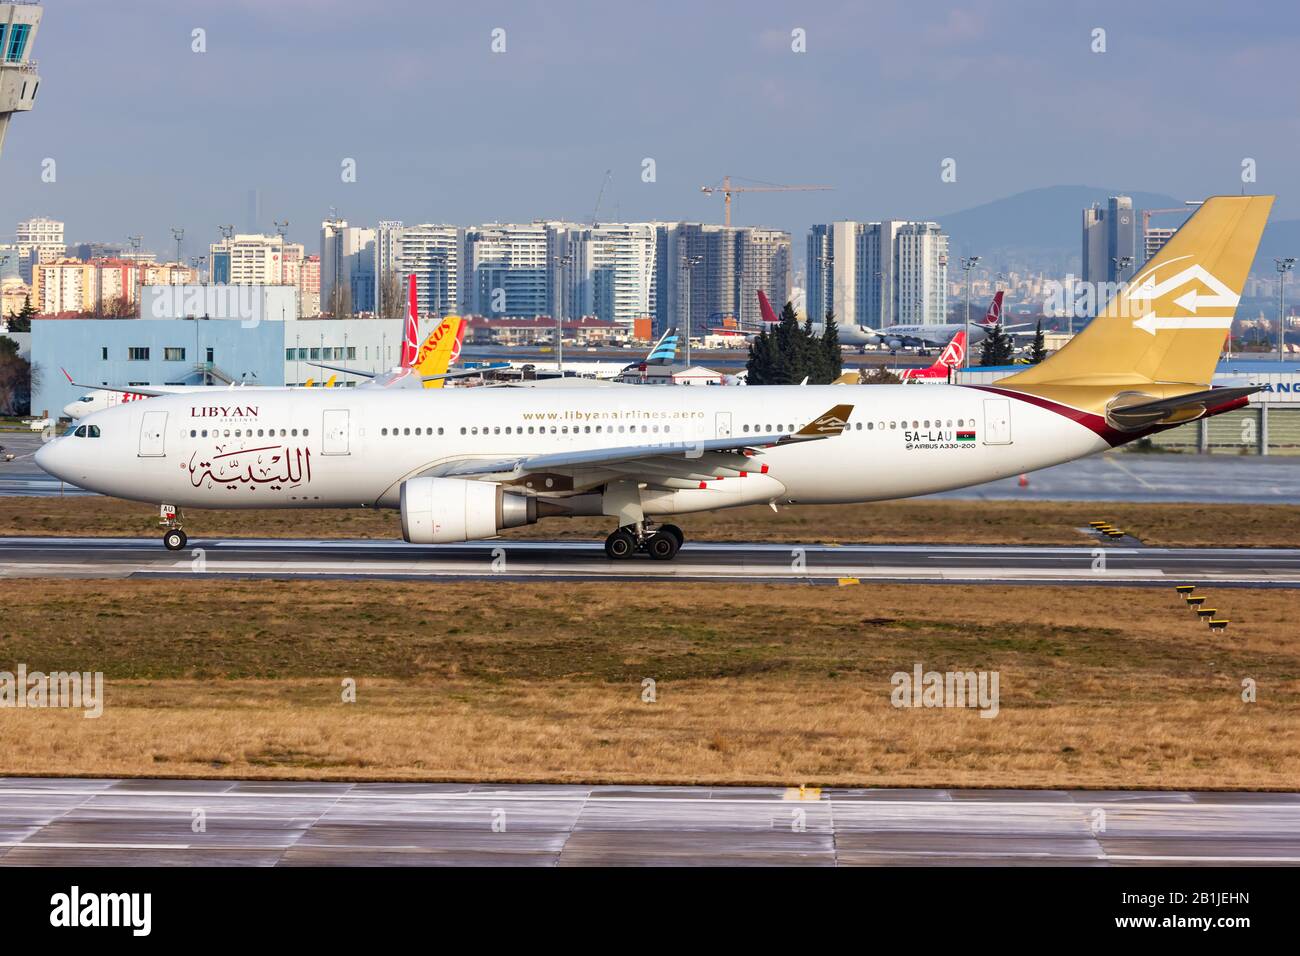 Istanbul, Turkey – February 15, 2019: Libyan Airlines Airbus A330 airplane at Istanbul Ataturk Airport (IST) in Turkey. Stock Photo